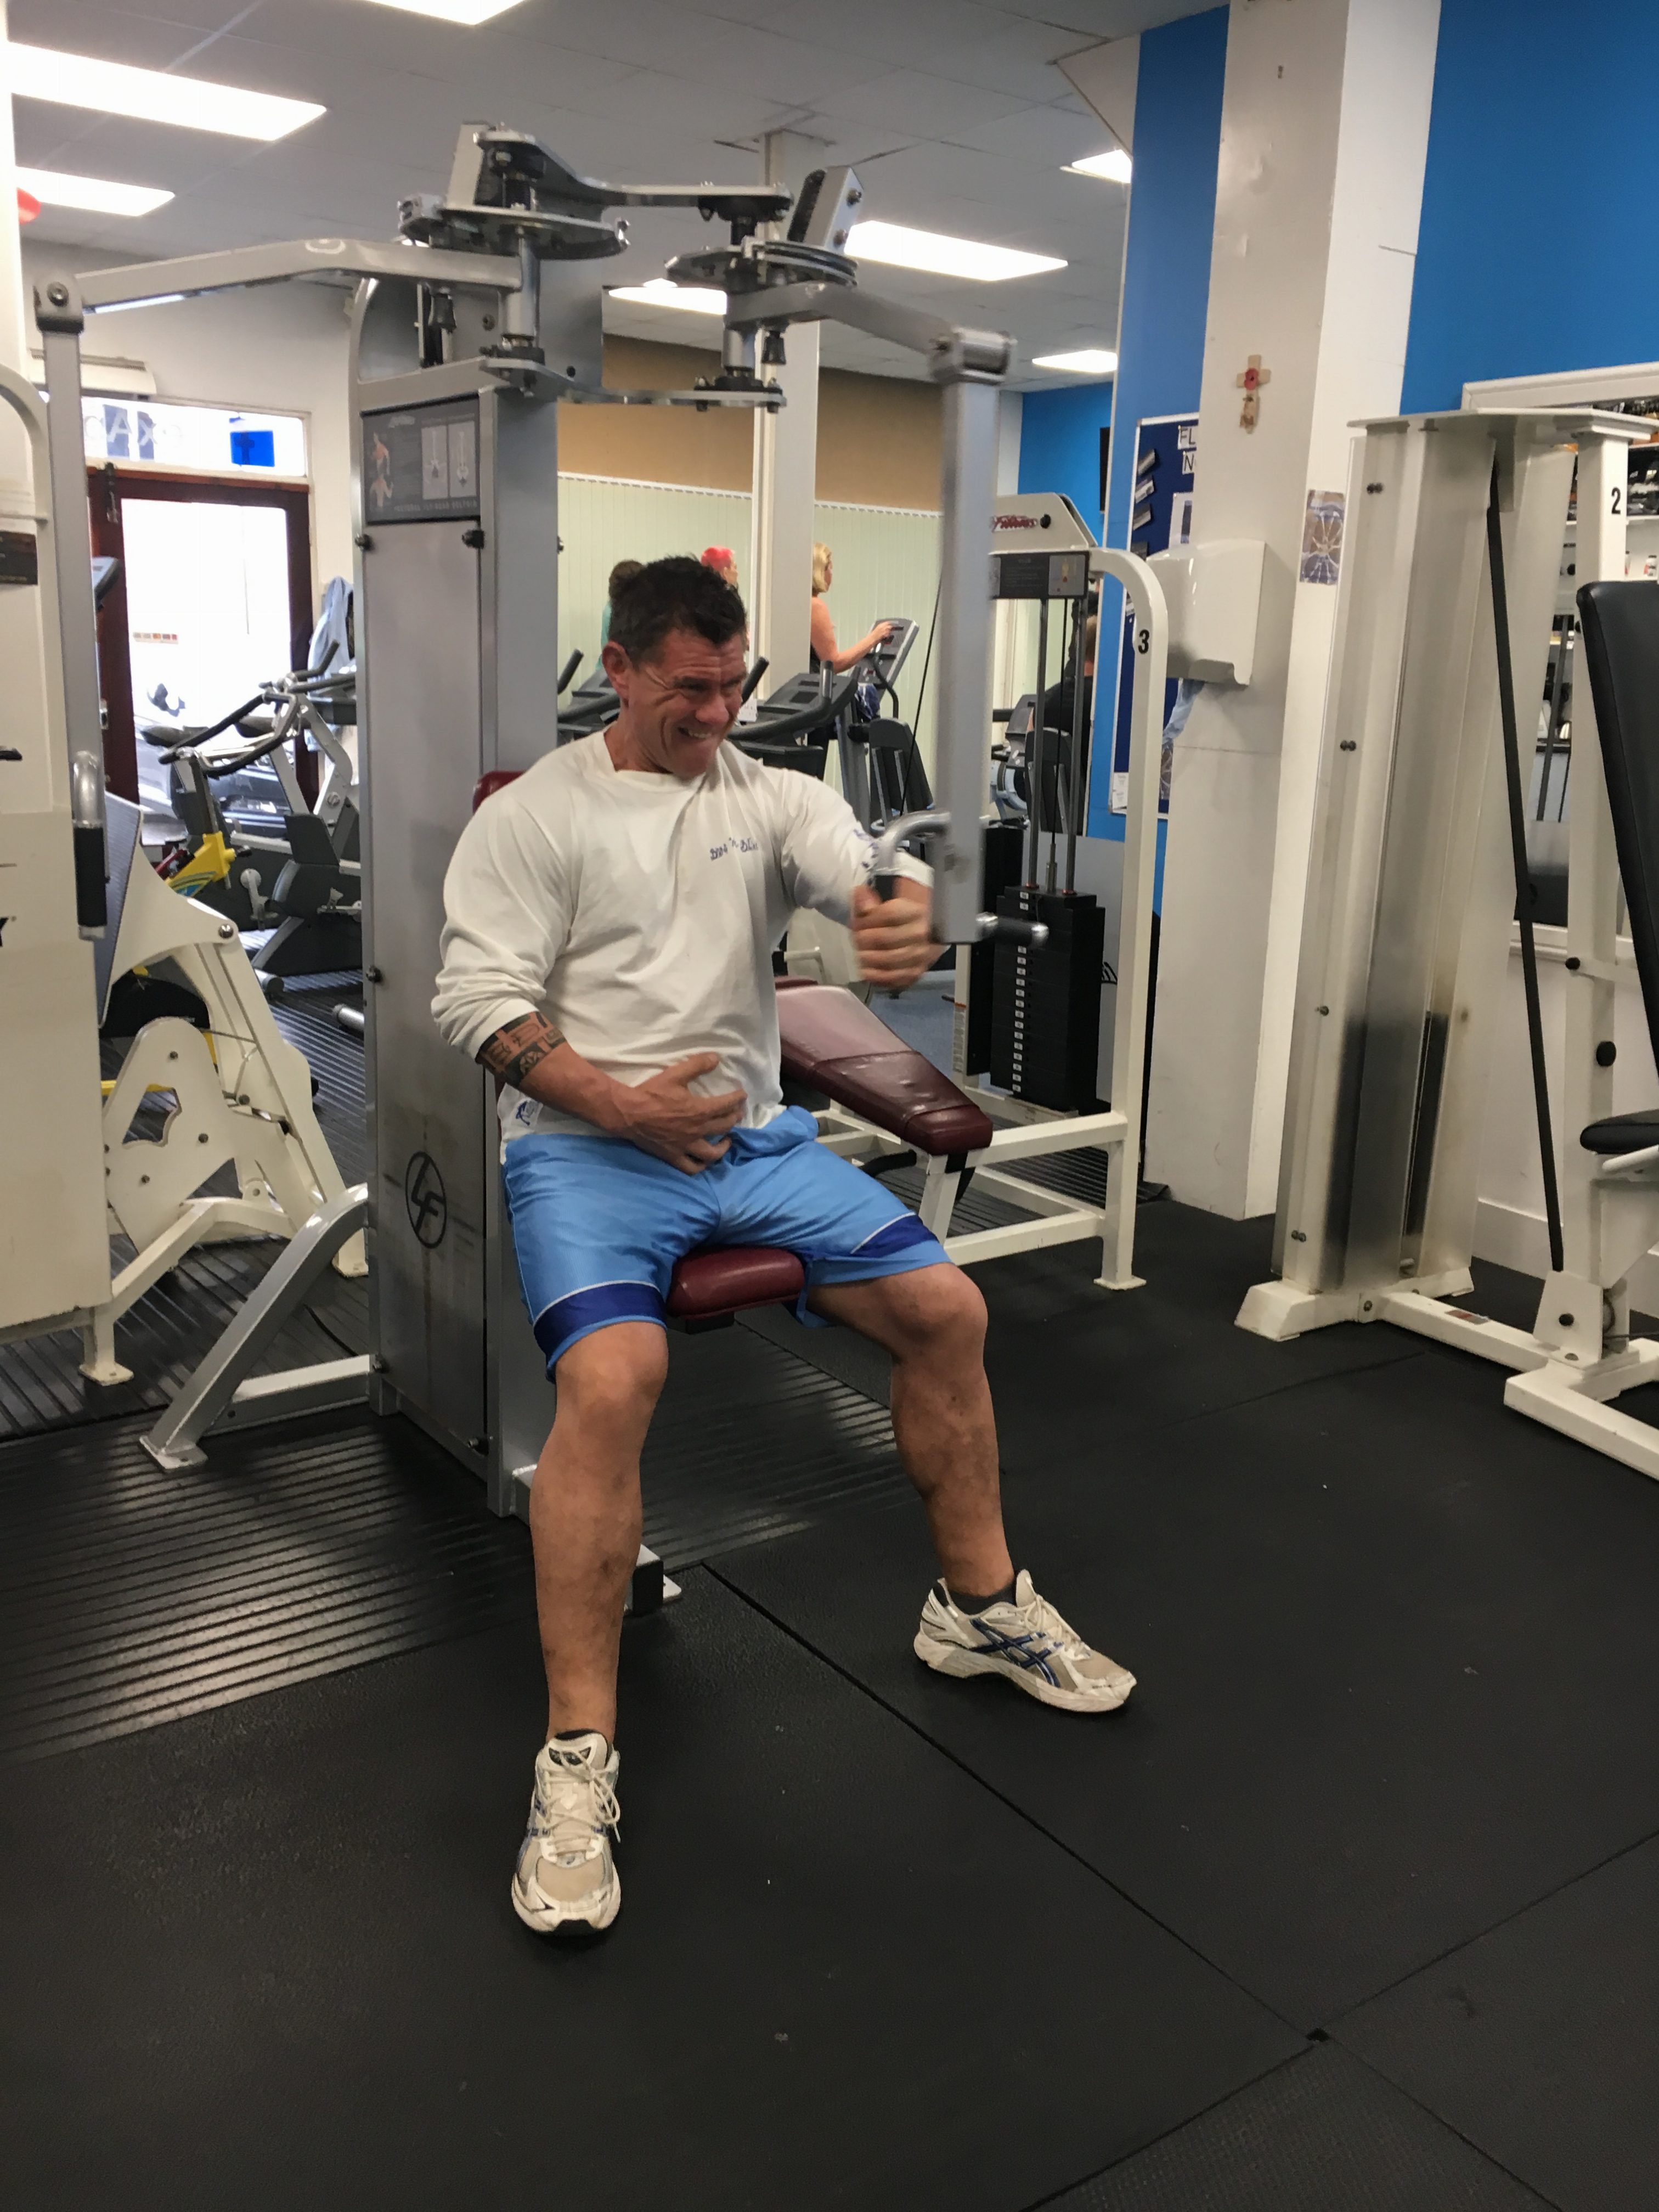 Training whilst injured – Why Not!